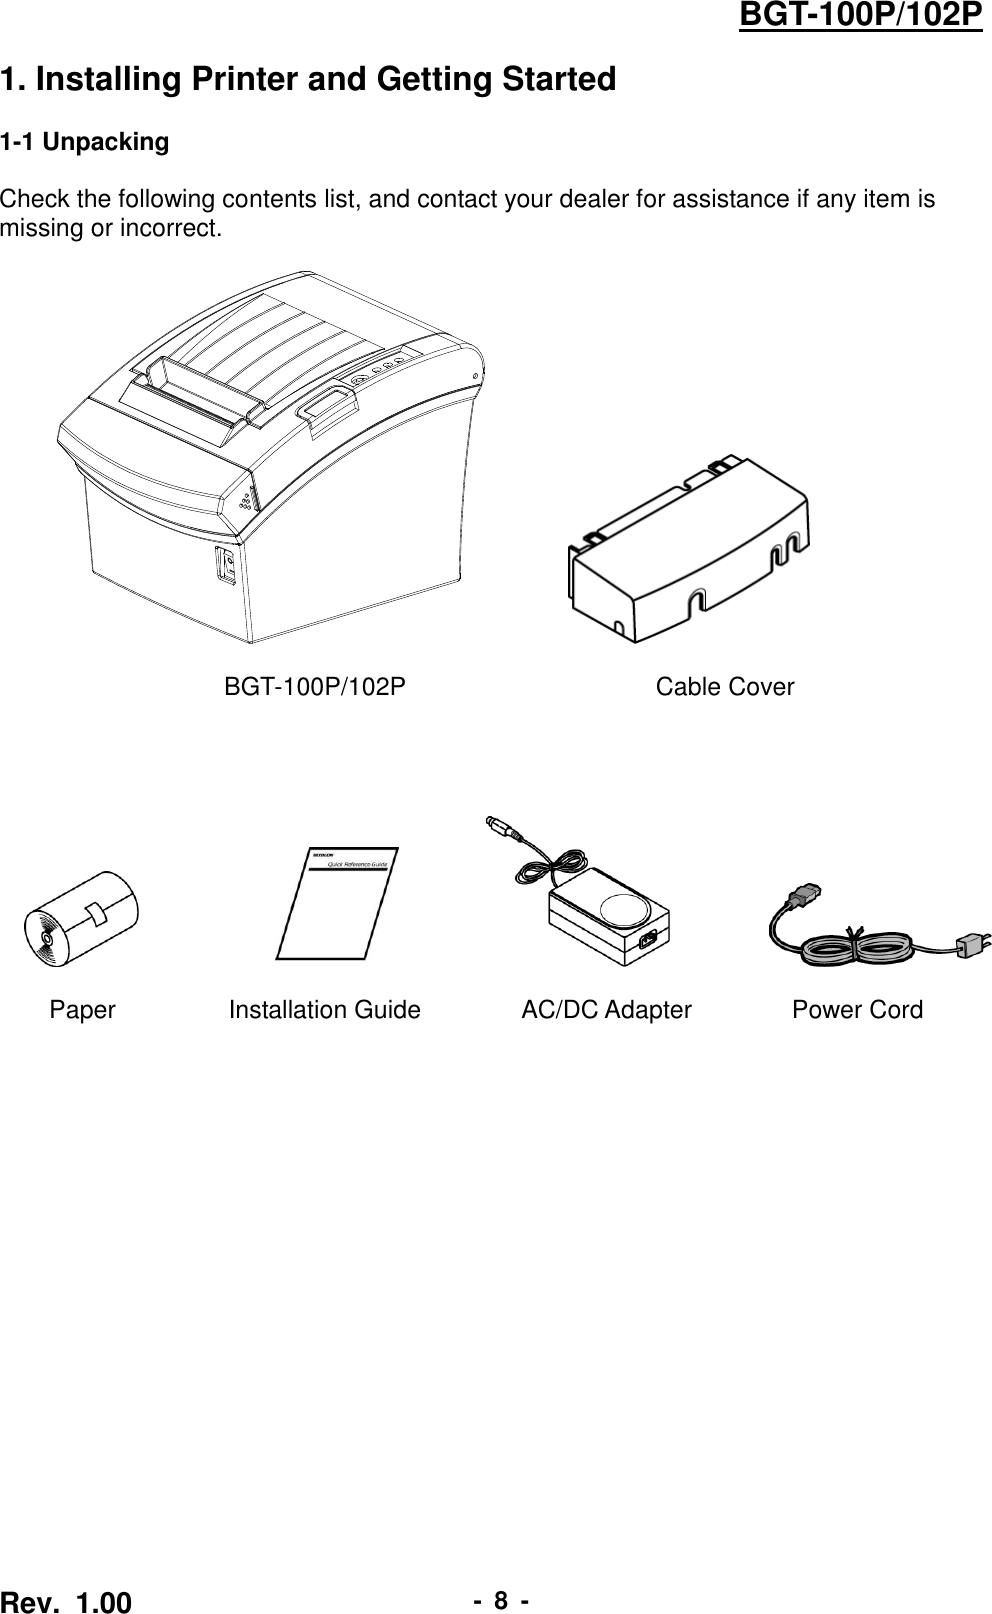  Rev.  1.00 -  8  - BGT-100P/102P 1. Installing Printer and Getting Started  1-1 Unpacking  Check the following contents list, and contact your dealer for assistance if any item is missing or incorrect.                           BGT-100P/102P                     Cable Cover                                      Paper               Installation Guide             AC/DC Adapter                Power Cord 